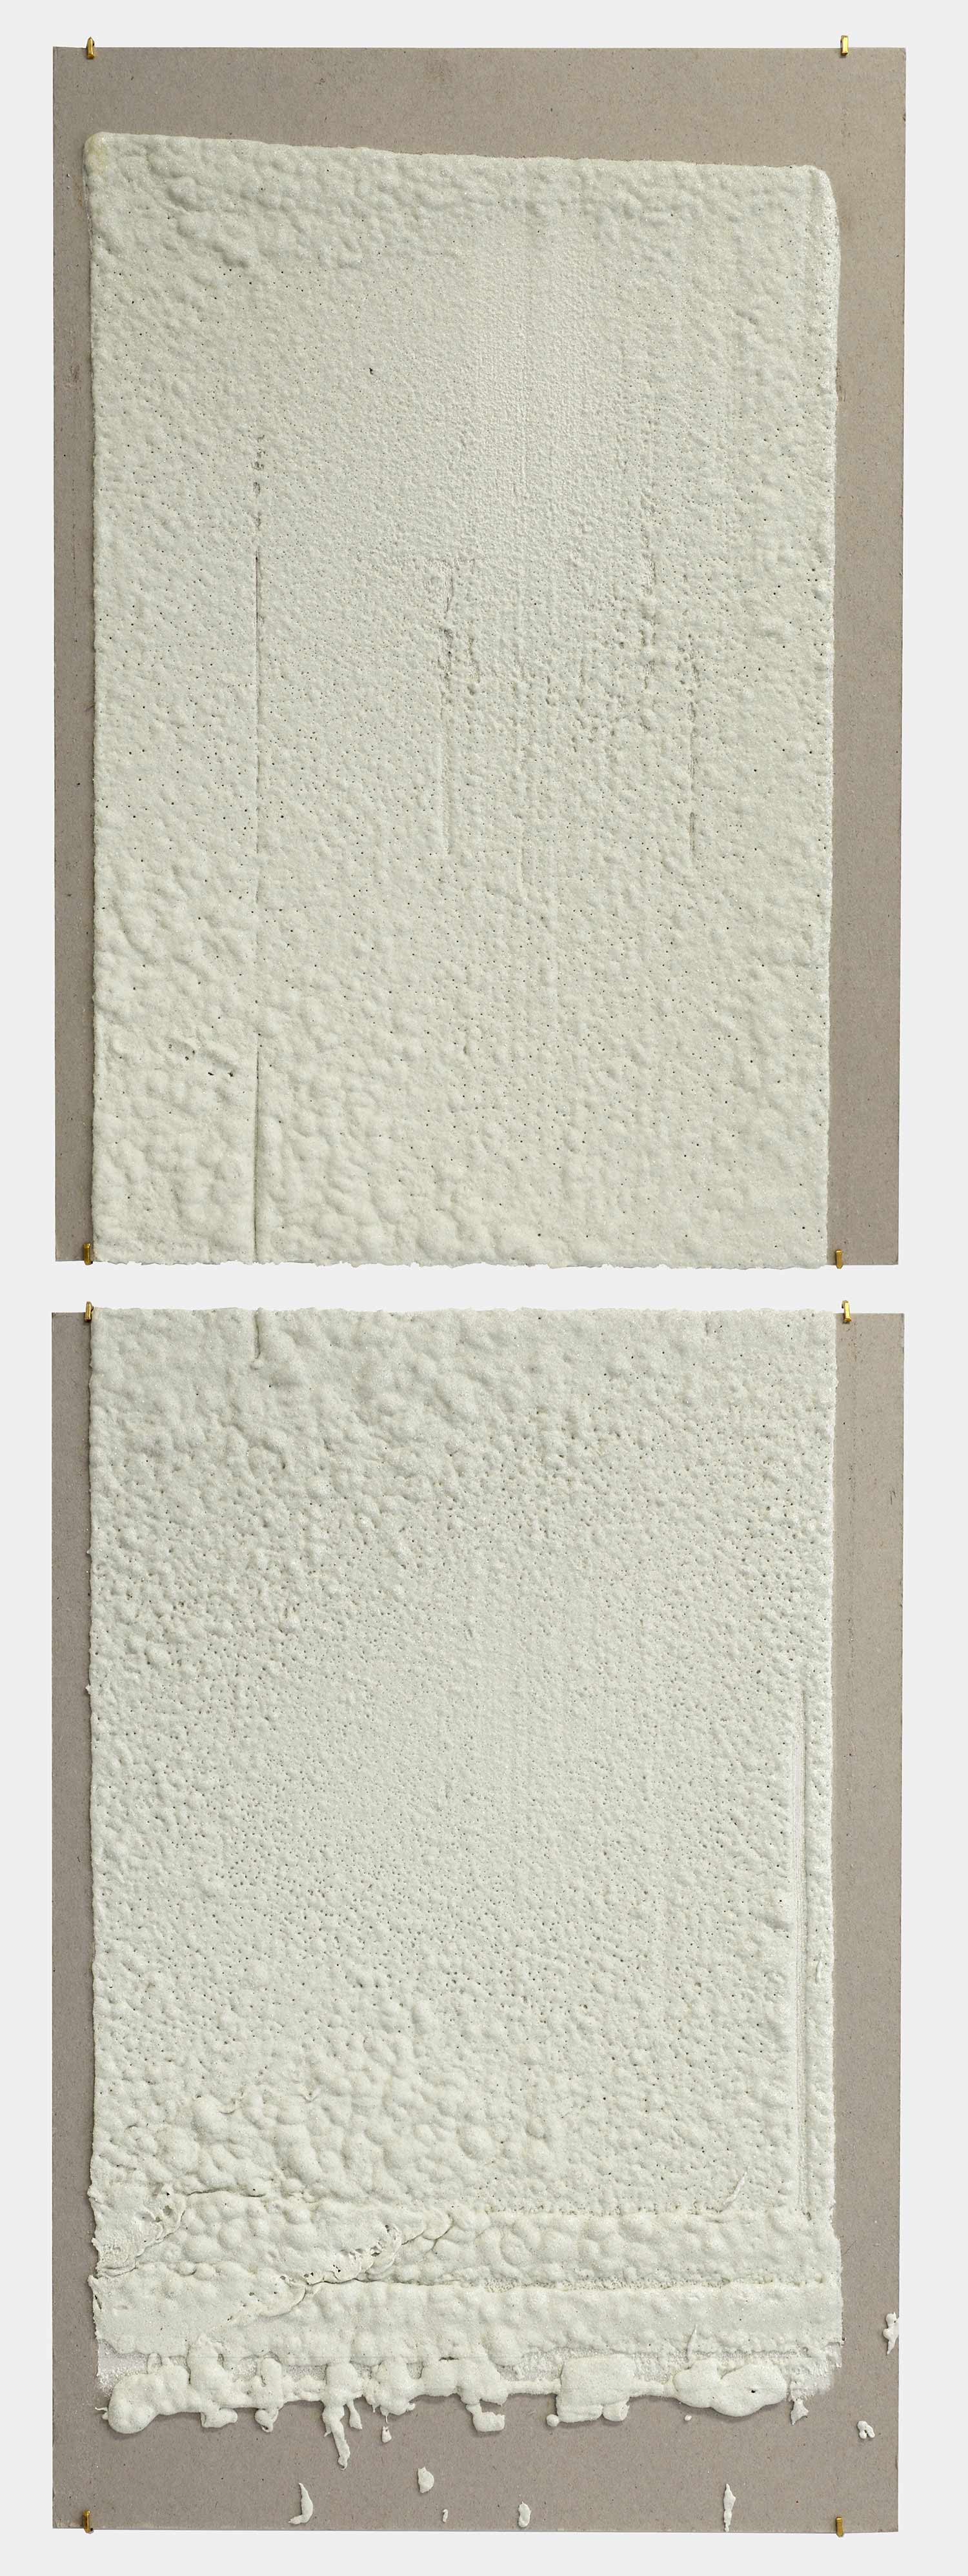   12in (section) (W), 2.27mm (T), White, Crosswalk, Manual marking, Columbus Ave, W92 St int,  2018  Thermoplastic paint, reflective glass particles on grey board  Diptych: 50 x 35 cm each   